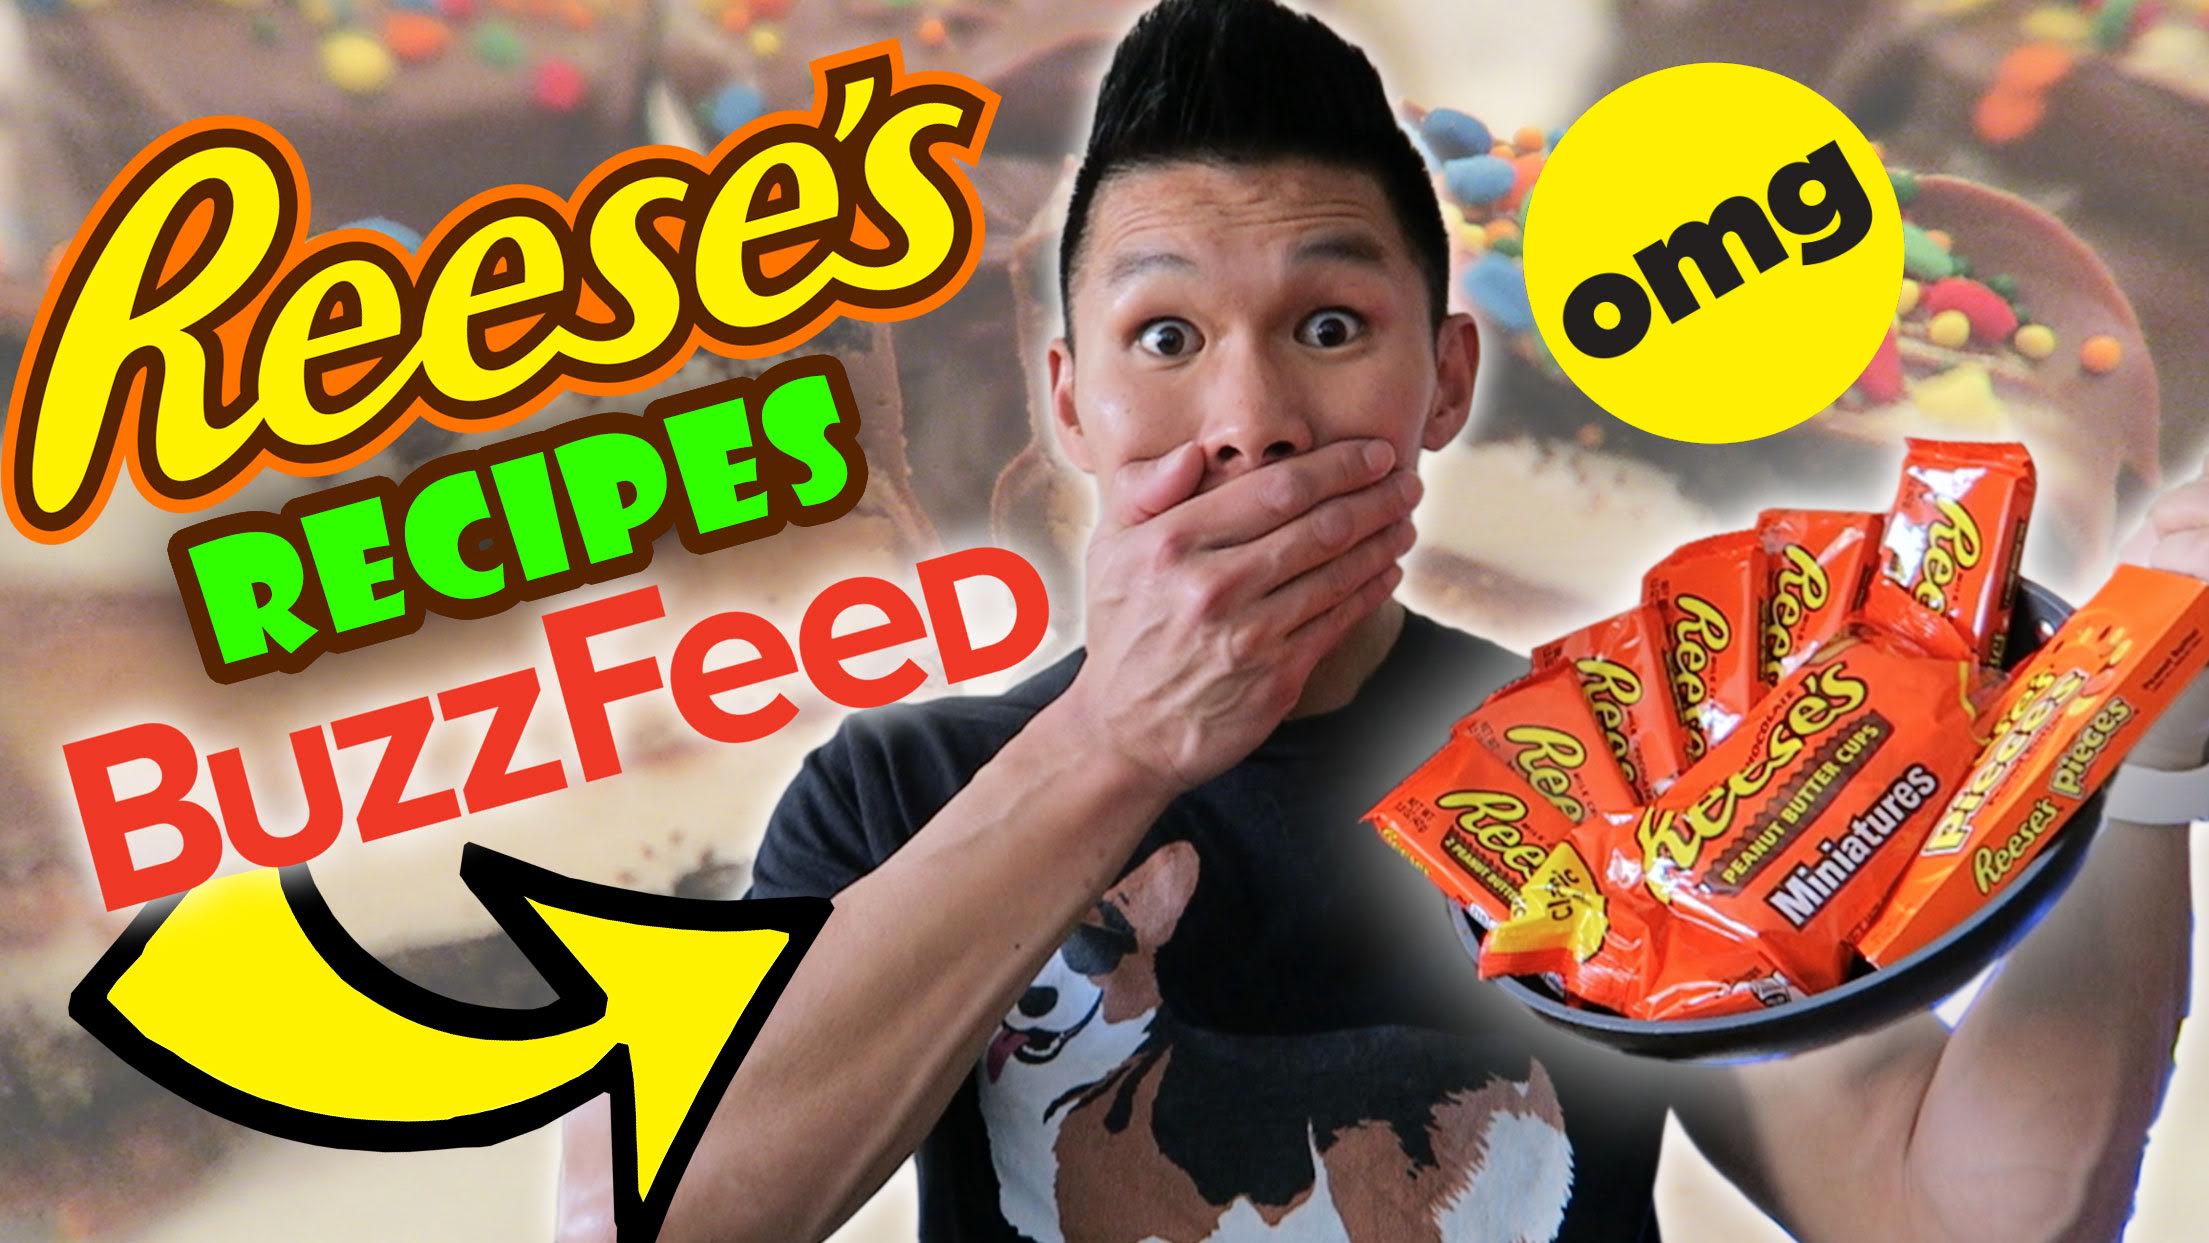 REESE'S BUZZFEED FOOD Recipes Taste Test - Life After College: Ep. 484